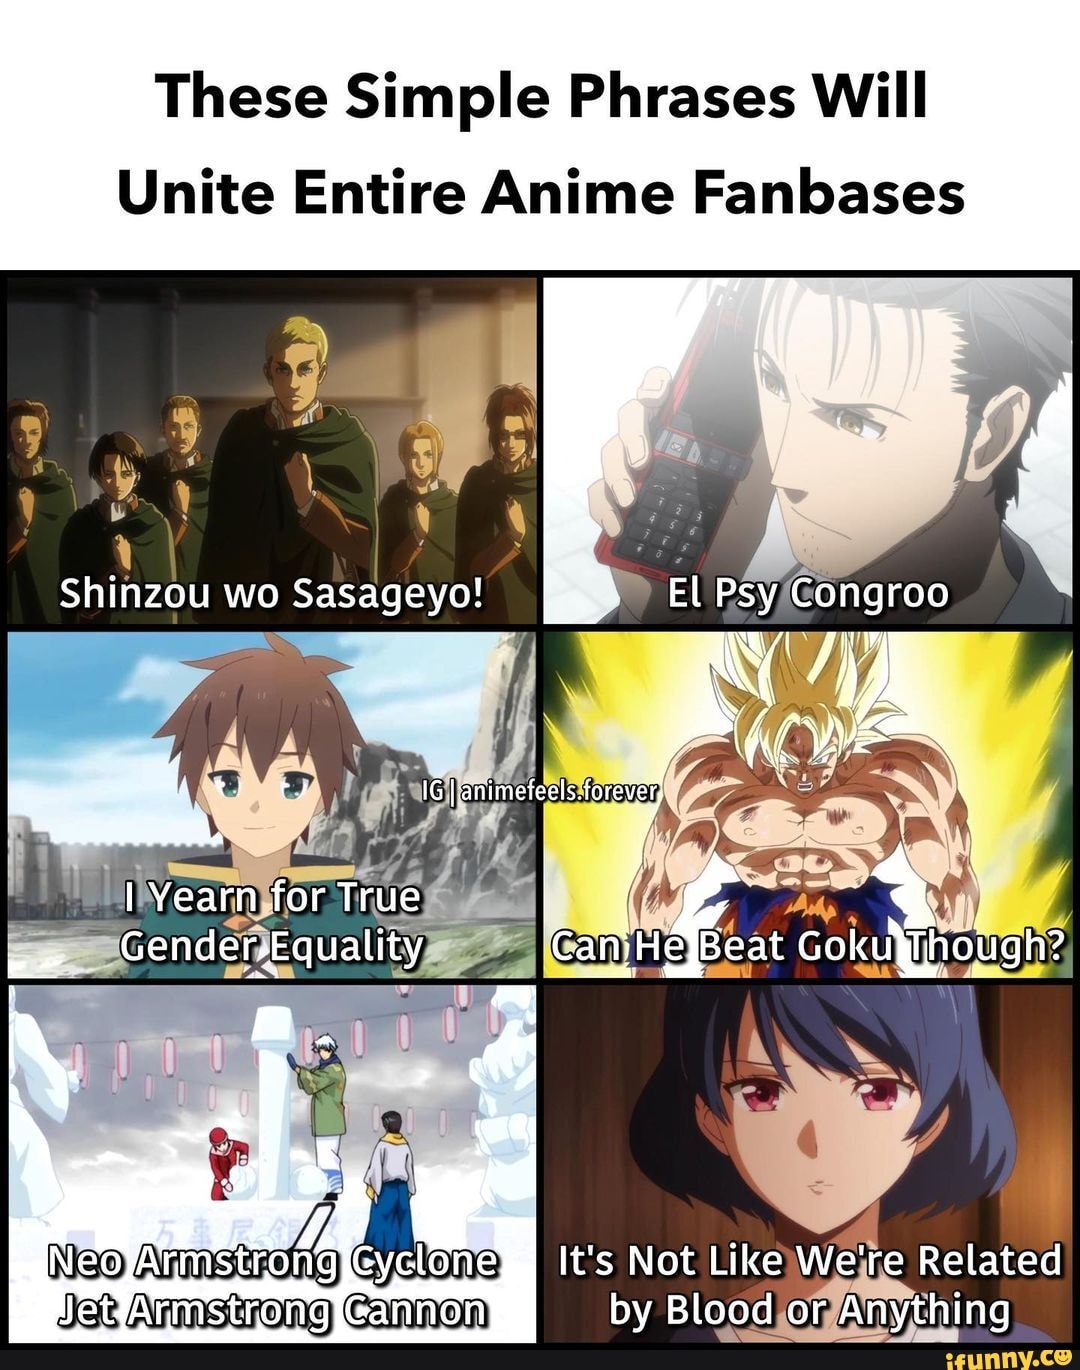 The most spoken phrase in anime stereotypes 